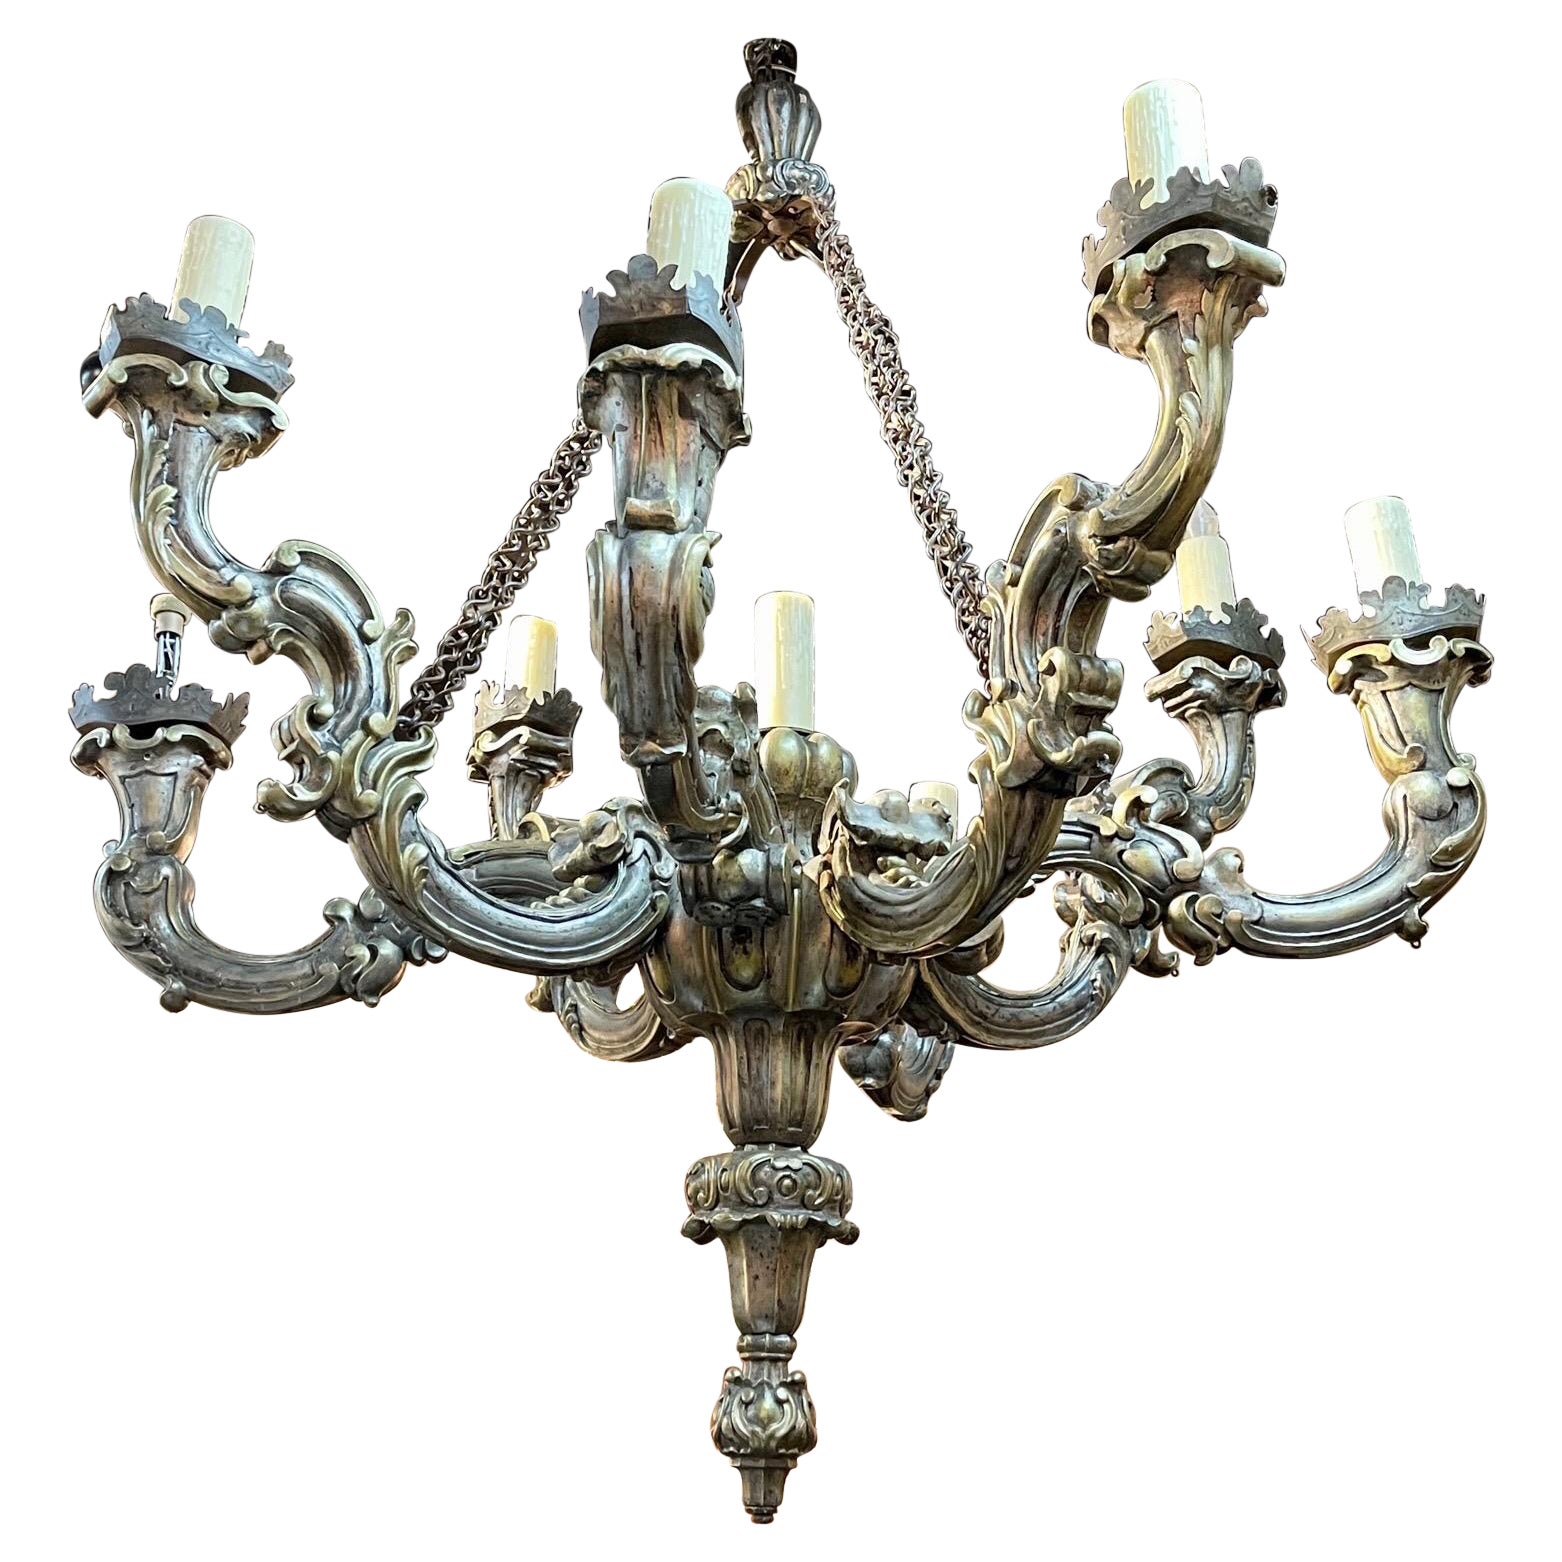 Large Scale Italian Carved Giltwood Chandelier